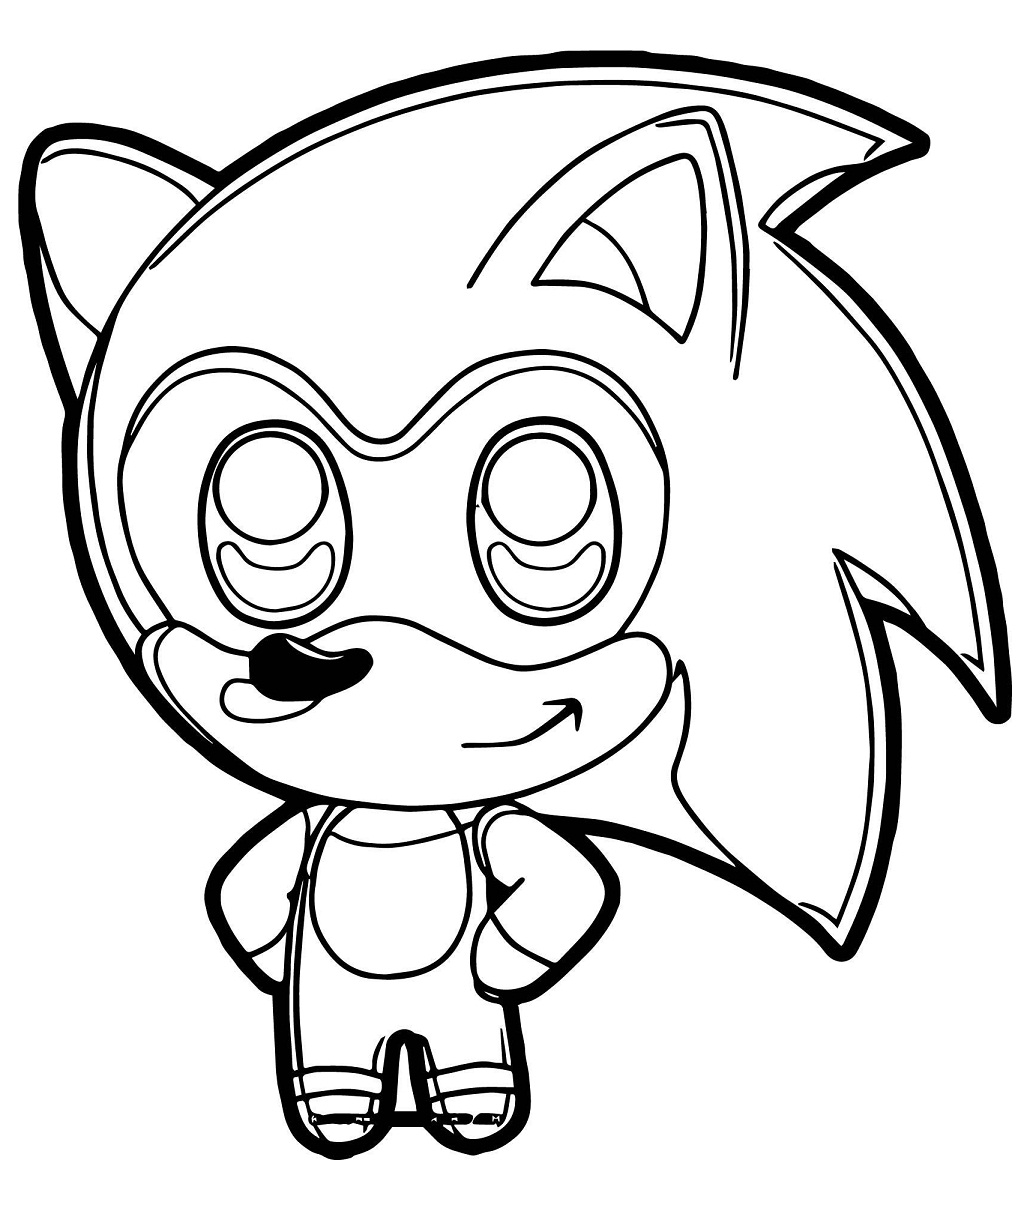 Sonic Cartoon Coloring Pages Coloring is a fun way to develop your